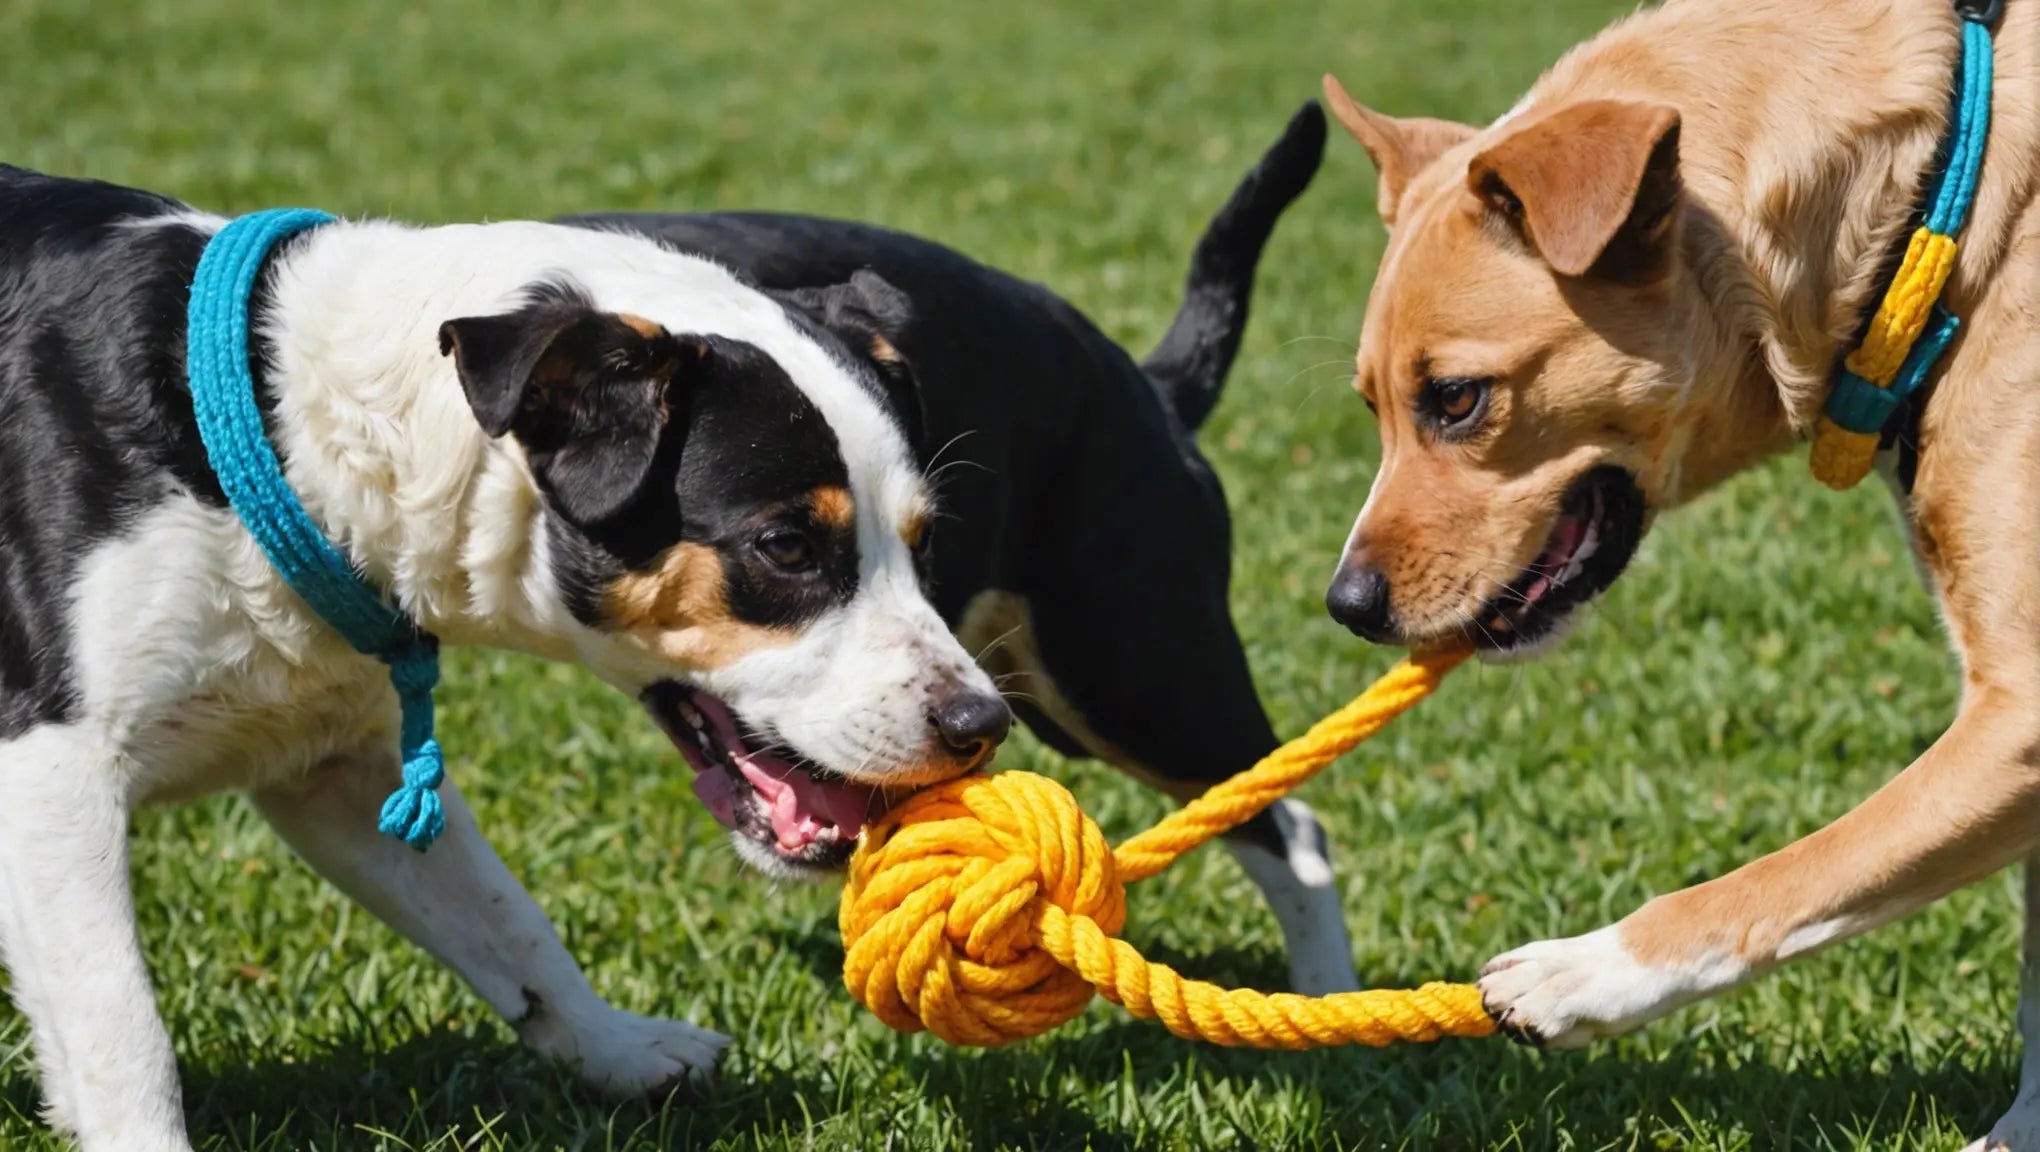 Tug of War: The Best Dog Tug Toys for Playtime